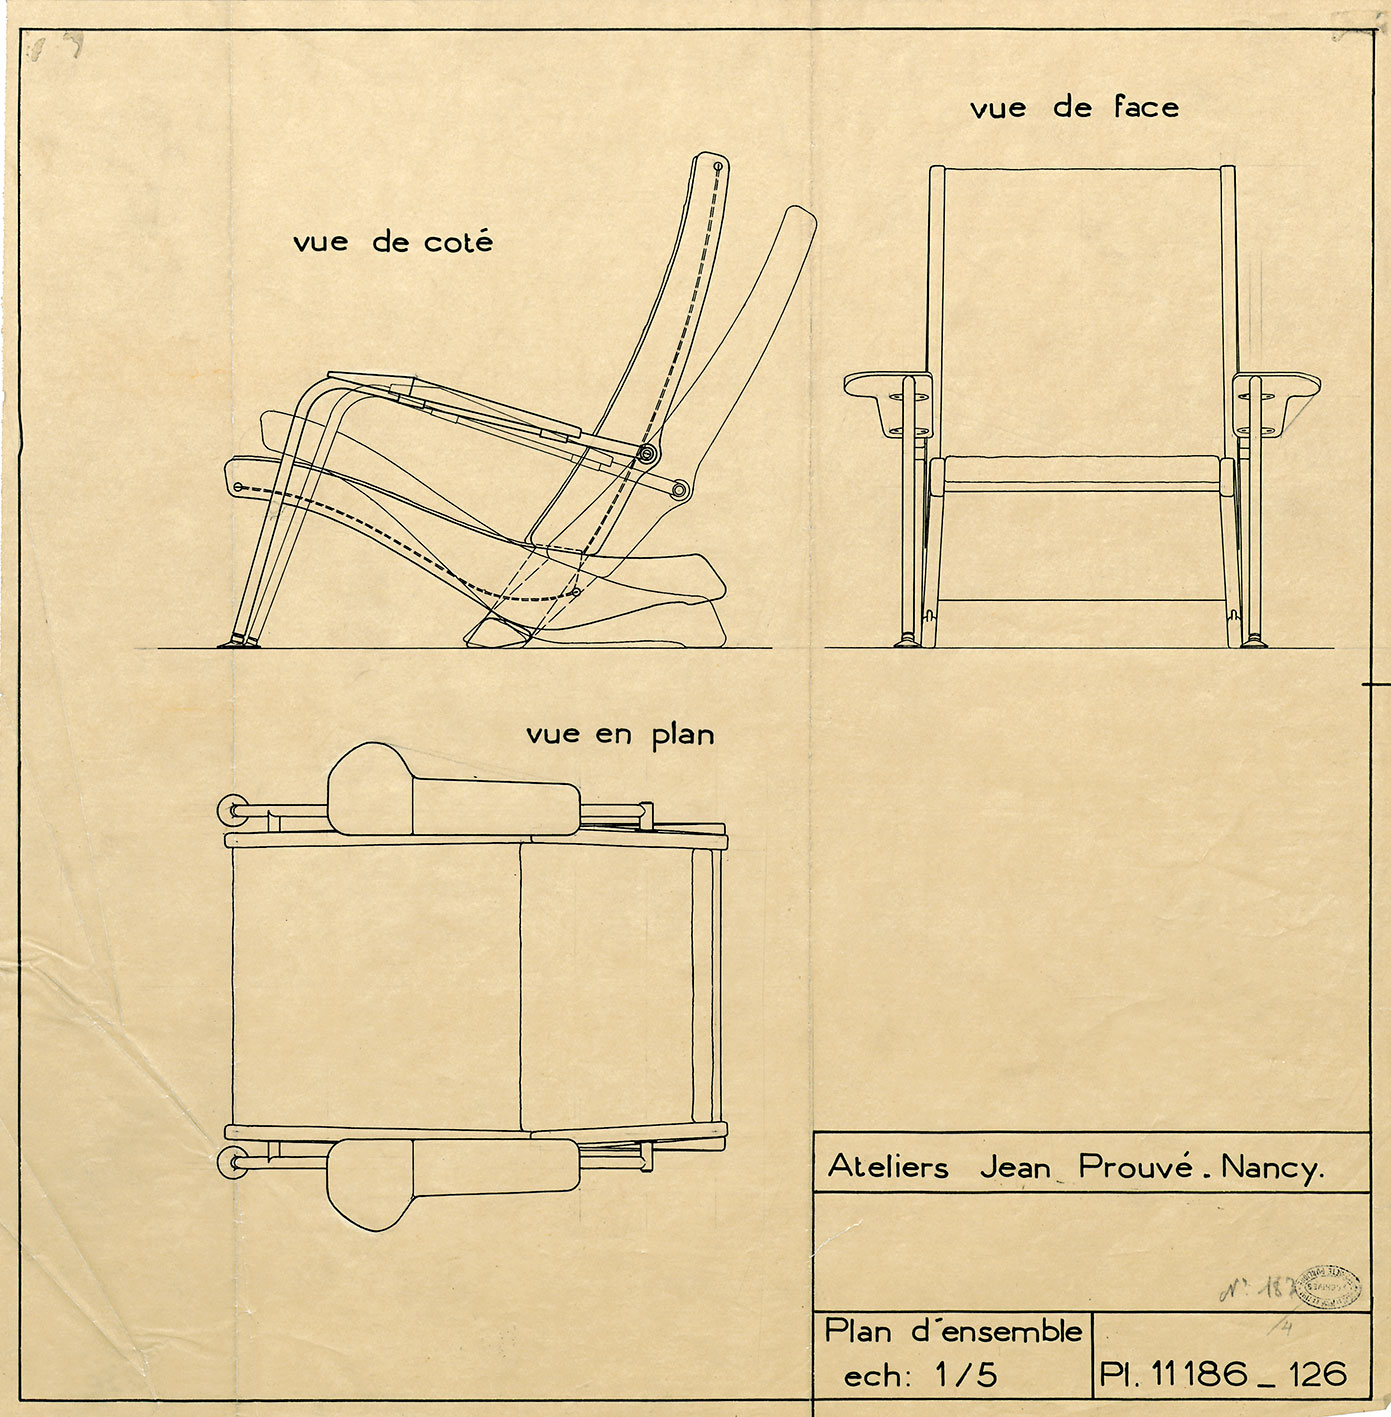 “Visiteur FV 32 armchair with adjustable back”. Ateliers Jean Prouvé drawing no. 11.186, 2 November 1948, by J. Boutemain.